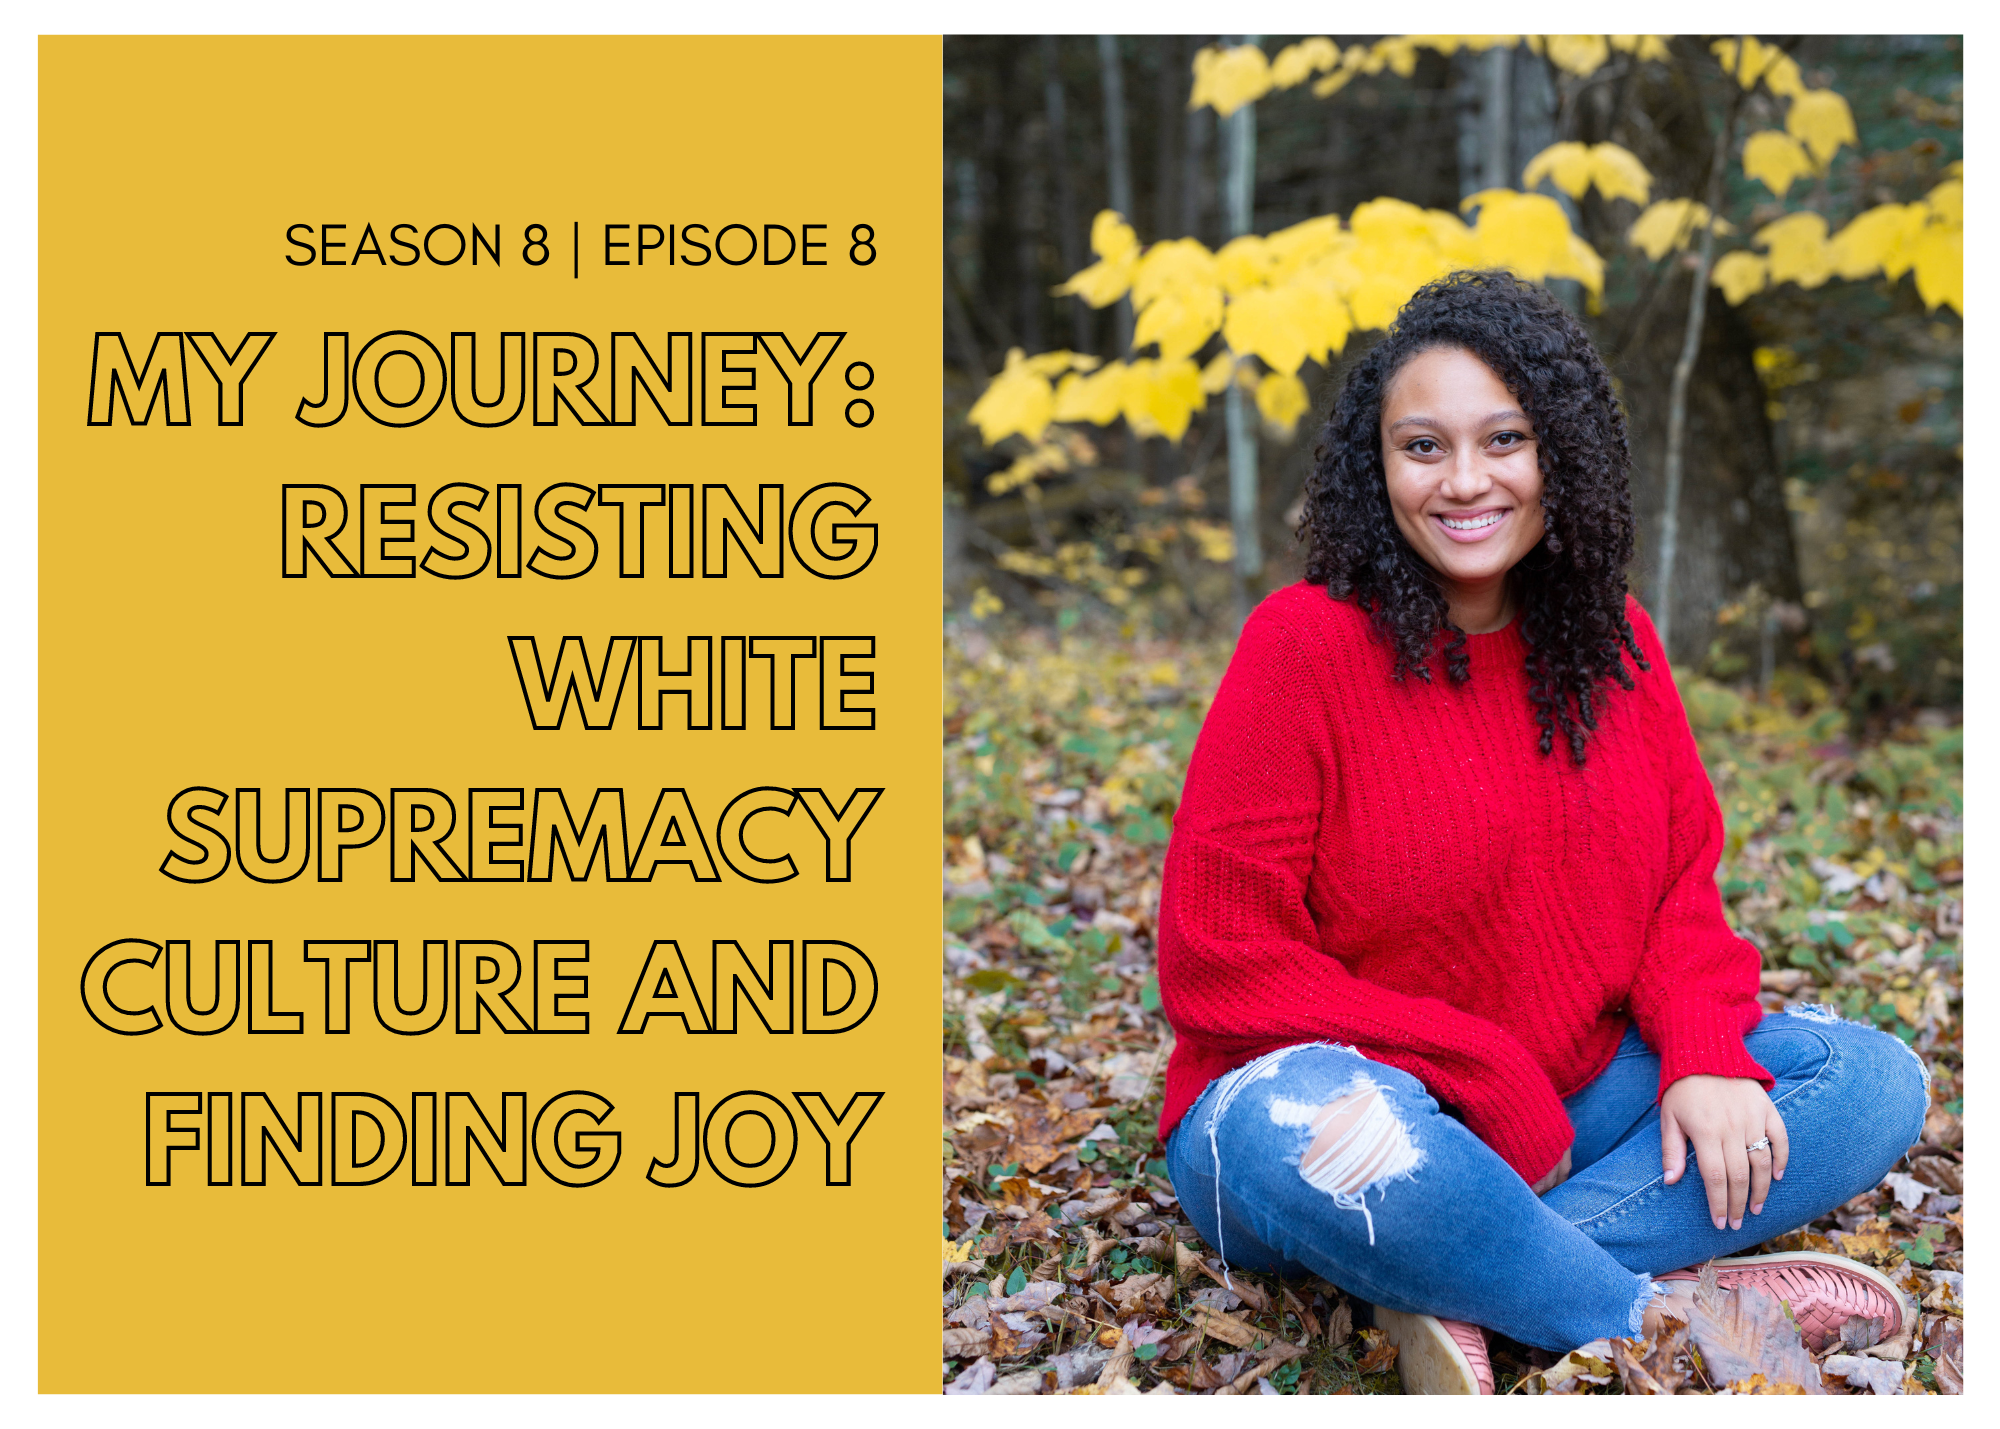 My Journey: Resisting White Supremacy Culture and Finding Joy